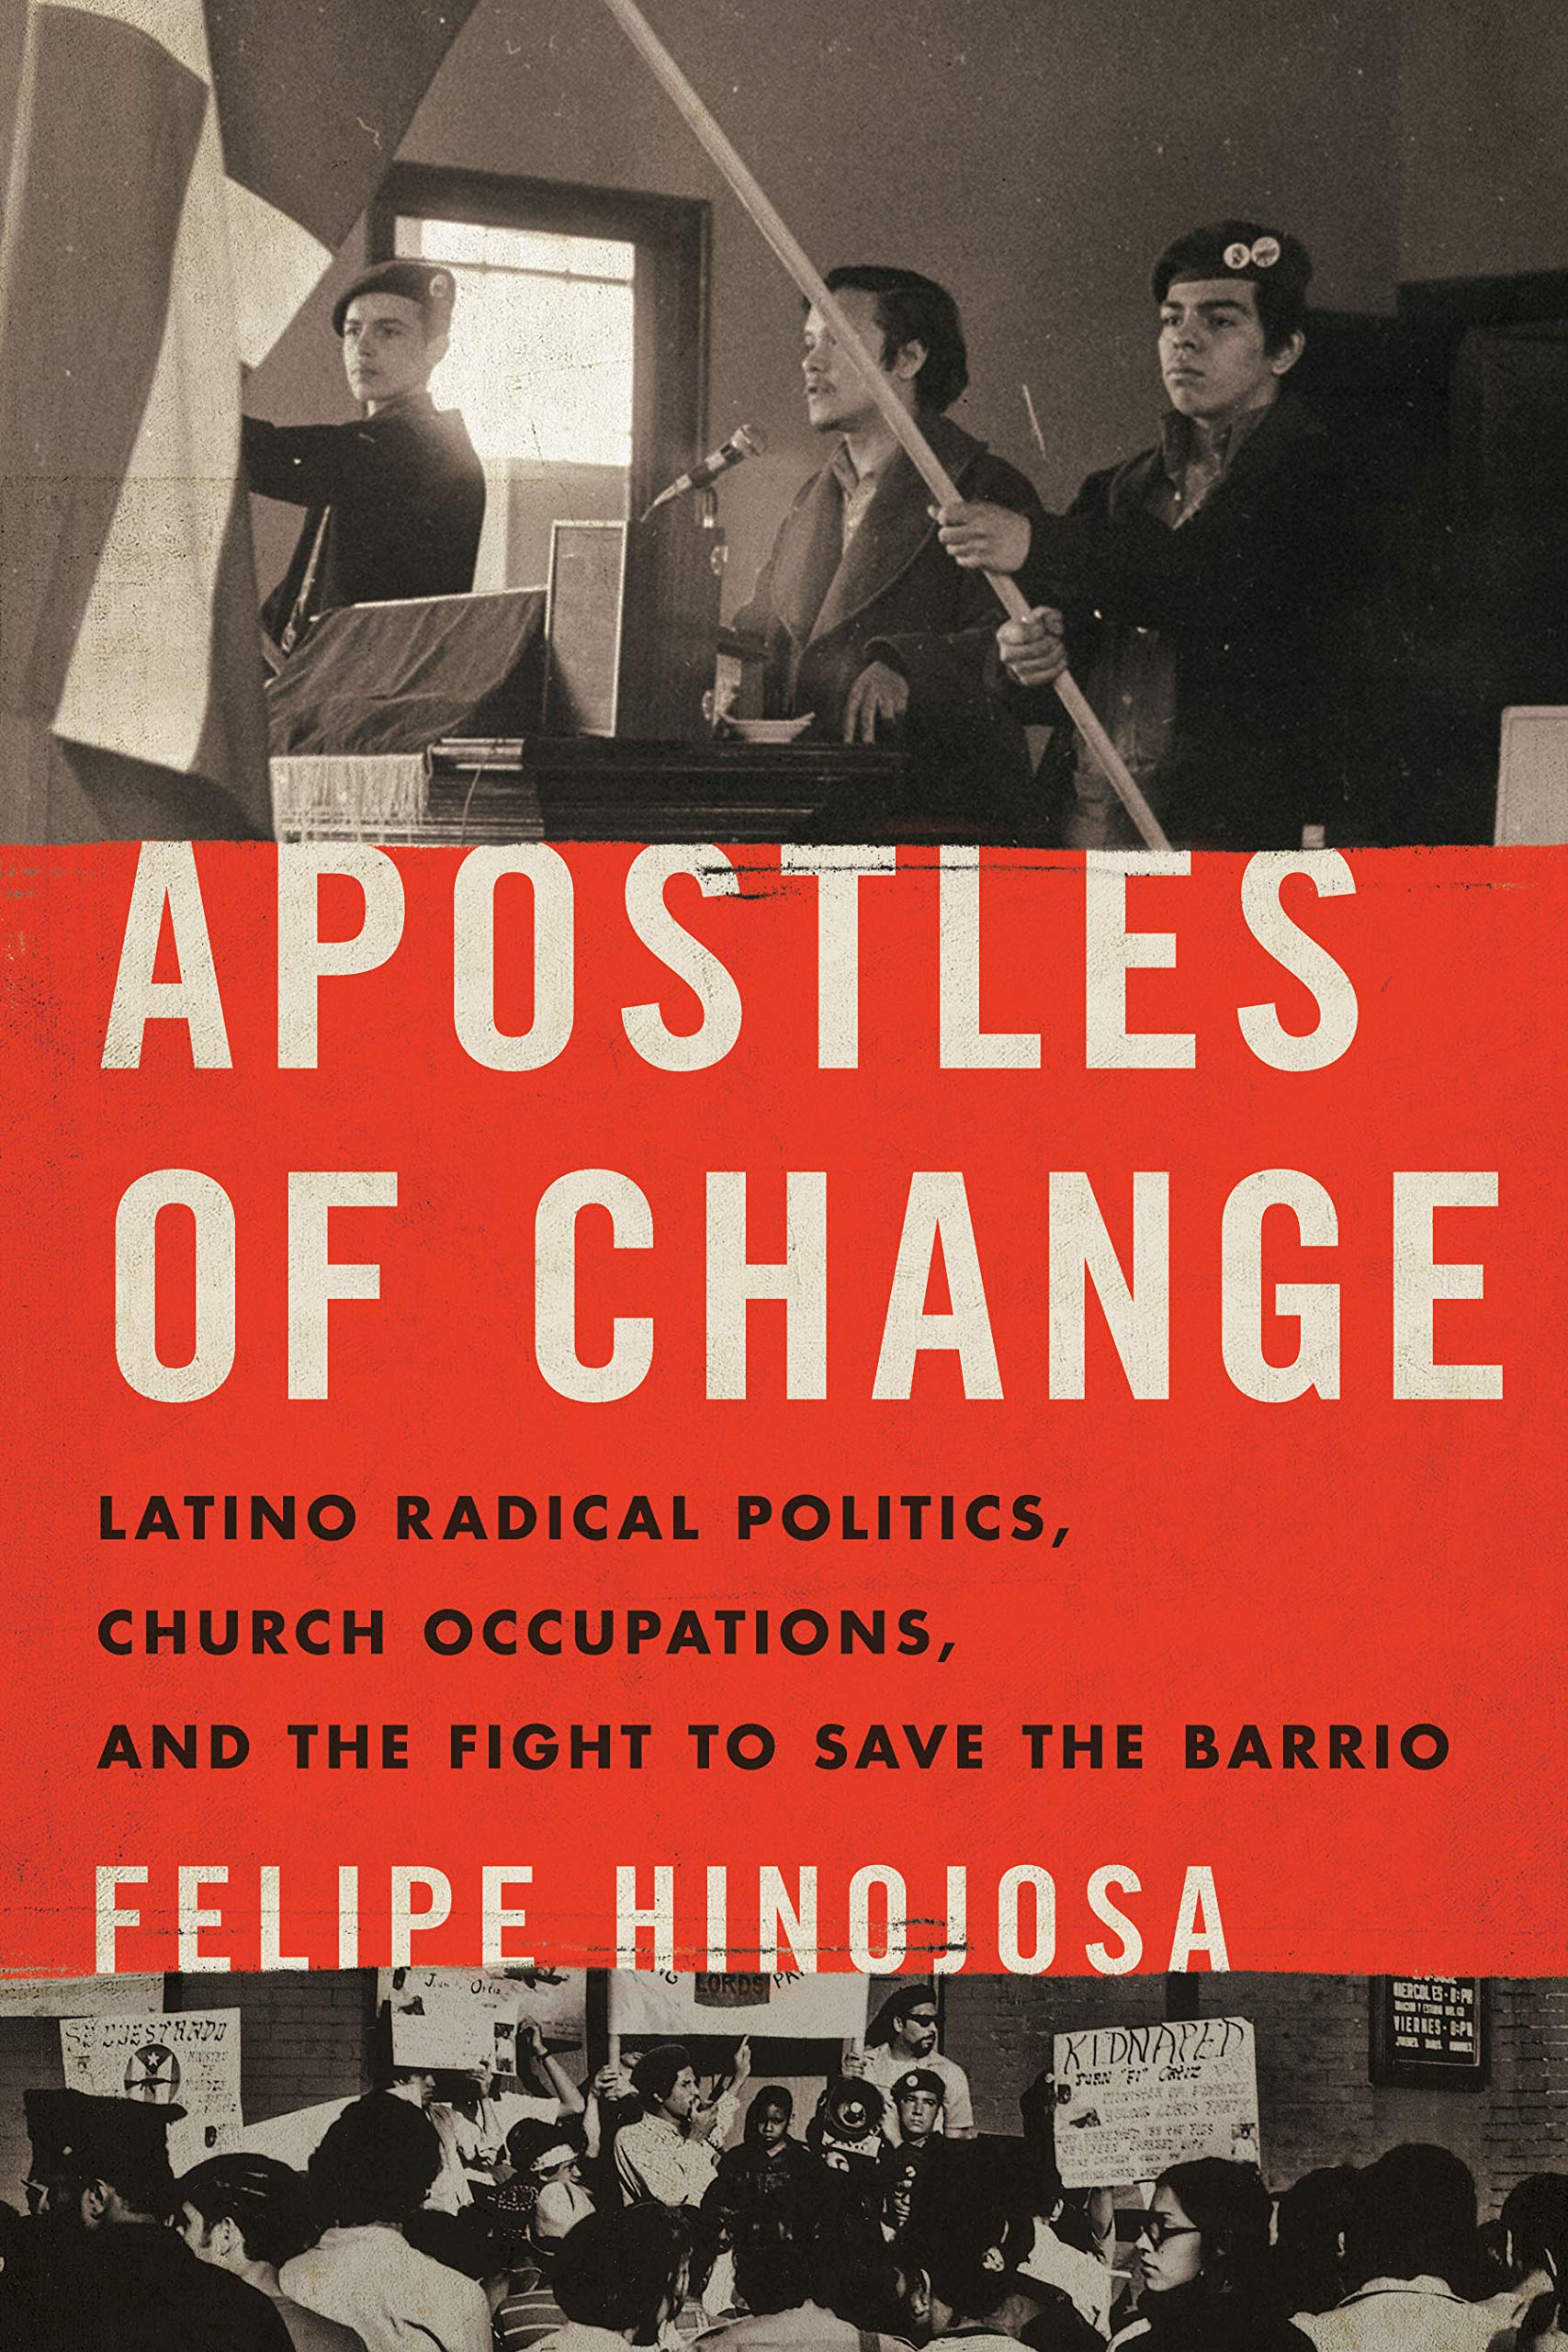 Cover of the book titled Apostles of Change: Latino Radical Politics, Church Occupations, and the Fight to Save the Barrio.